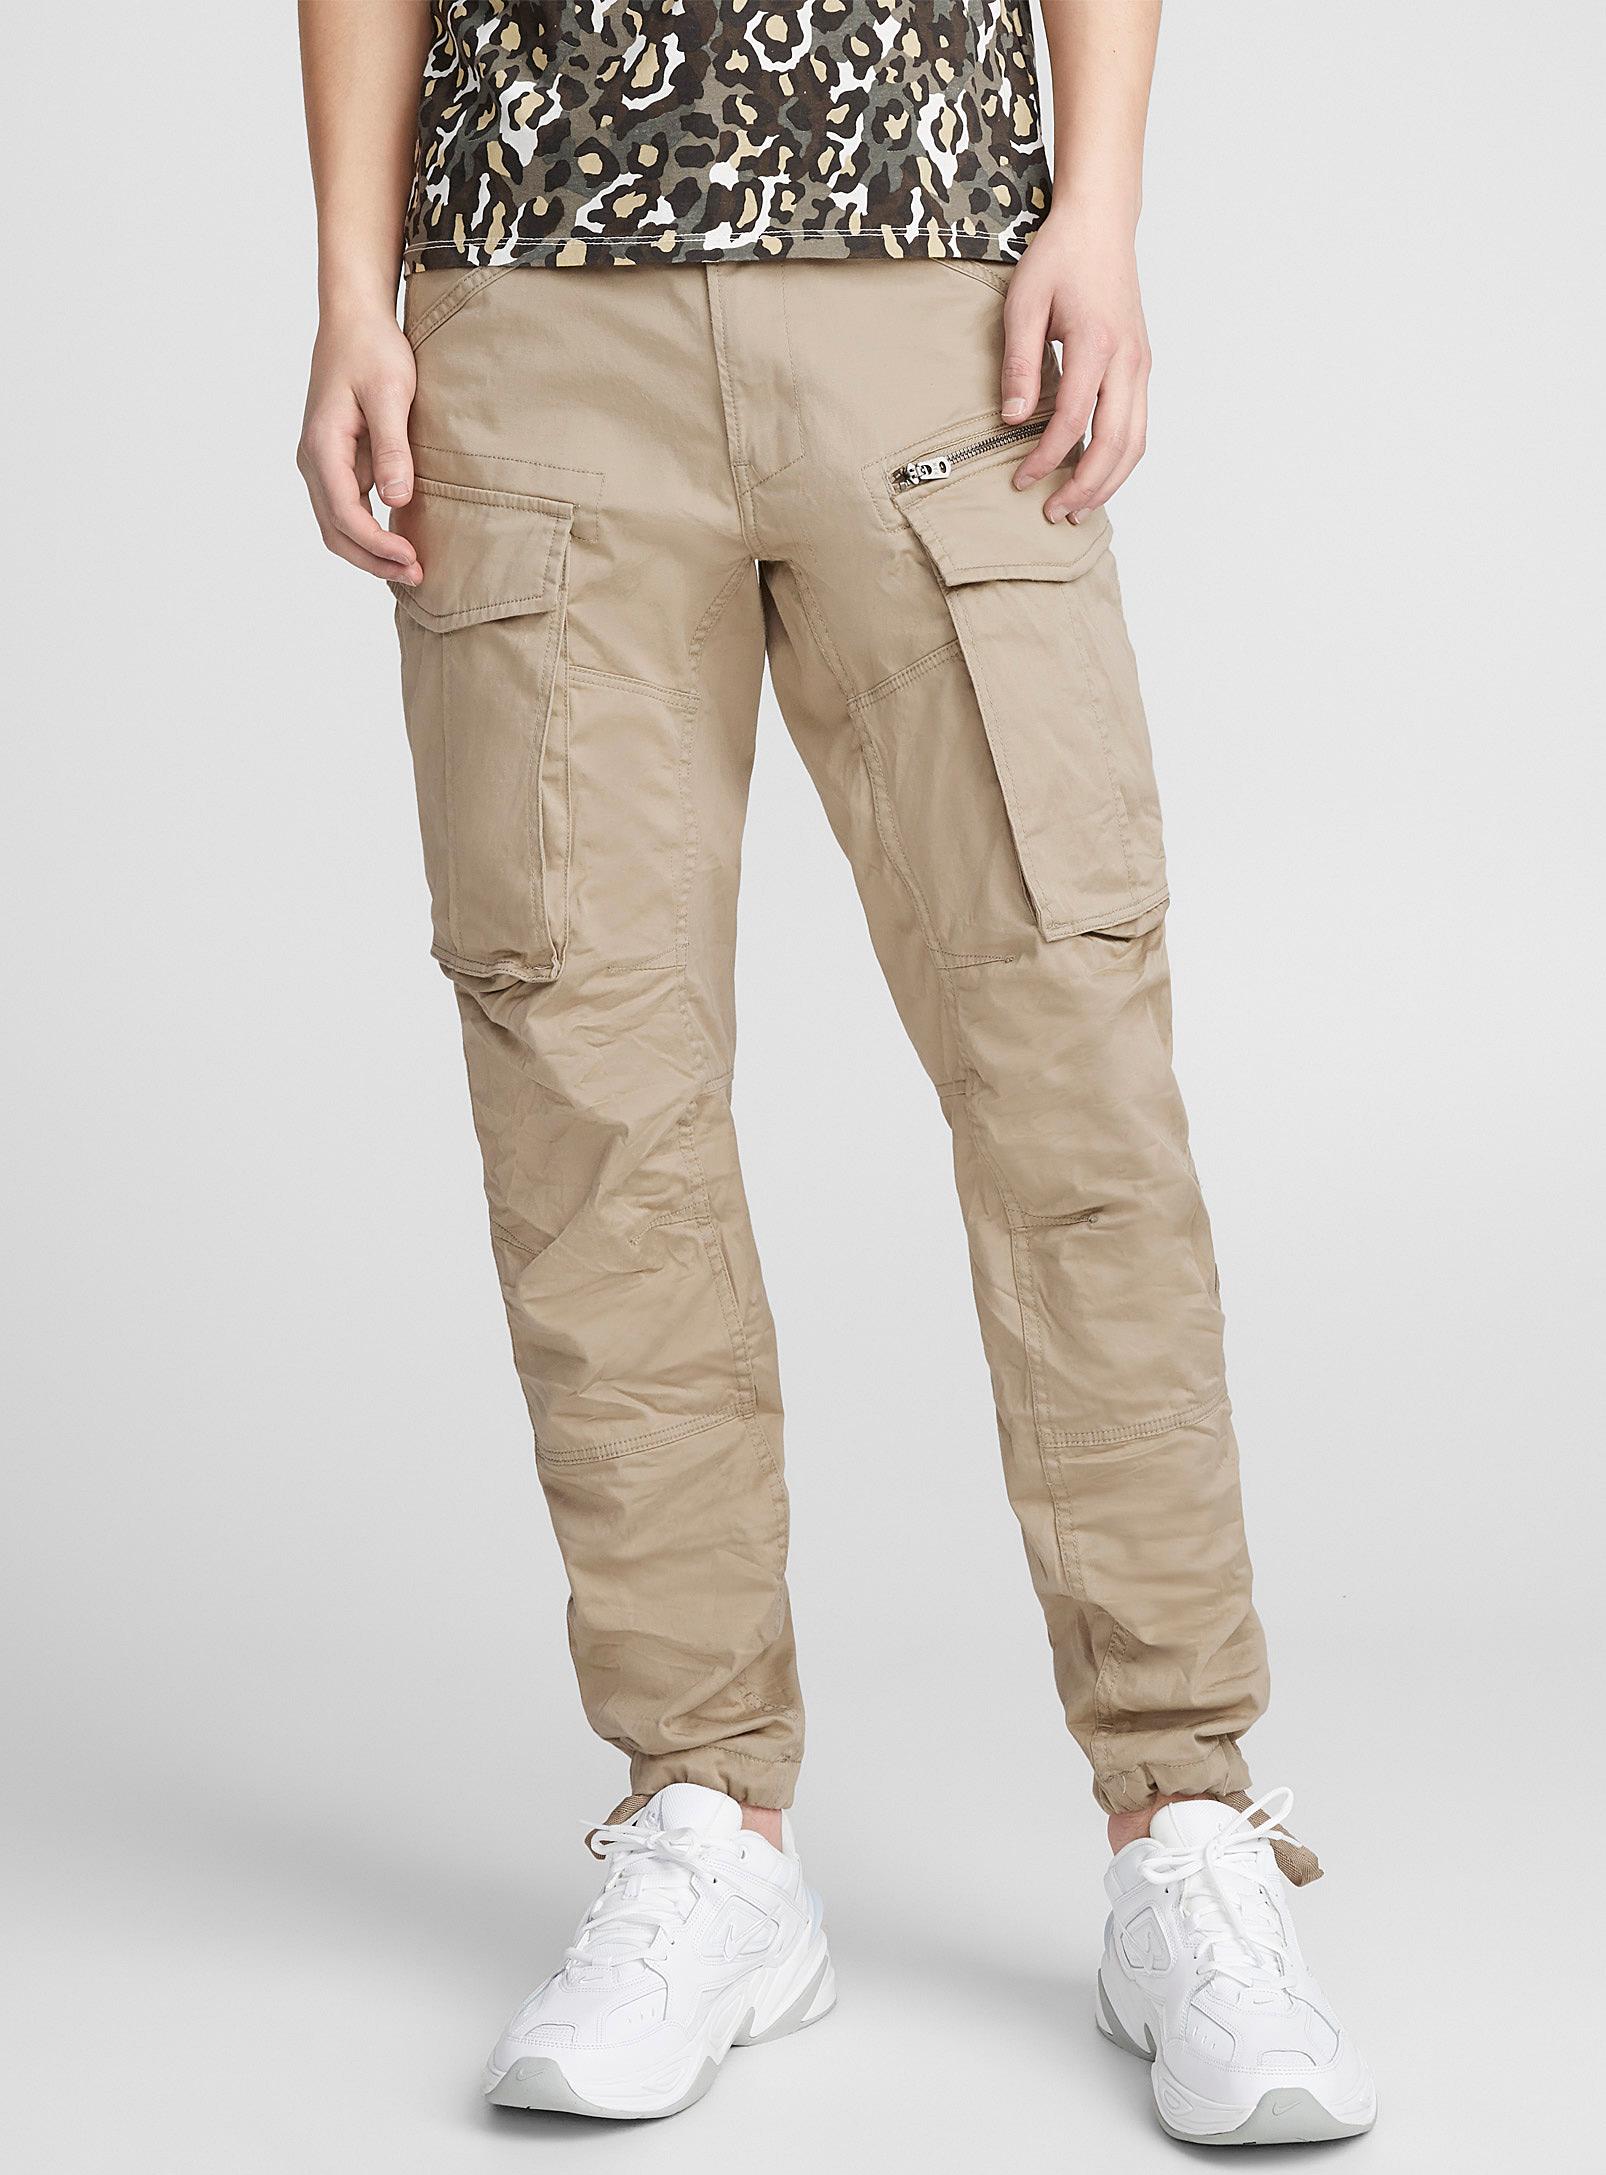 G-Star RAW Cotton Rovic 3d Cargo Pant Skinny Fit (men, Beige, 30) in ...